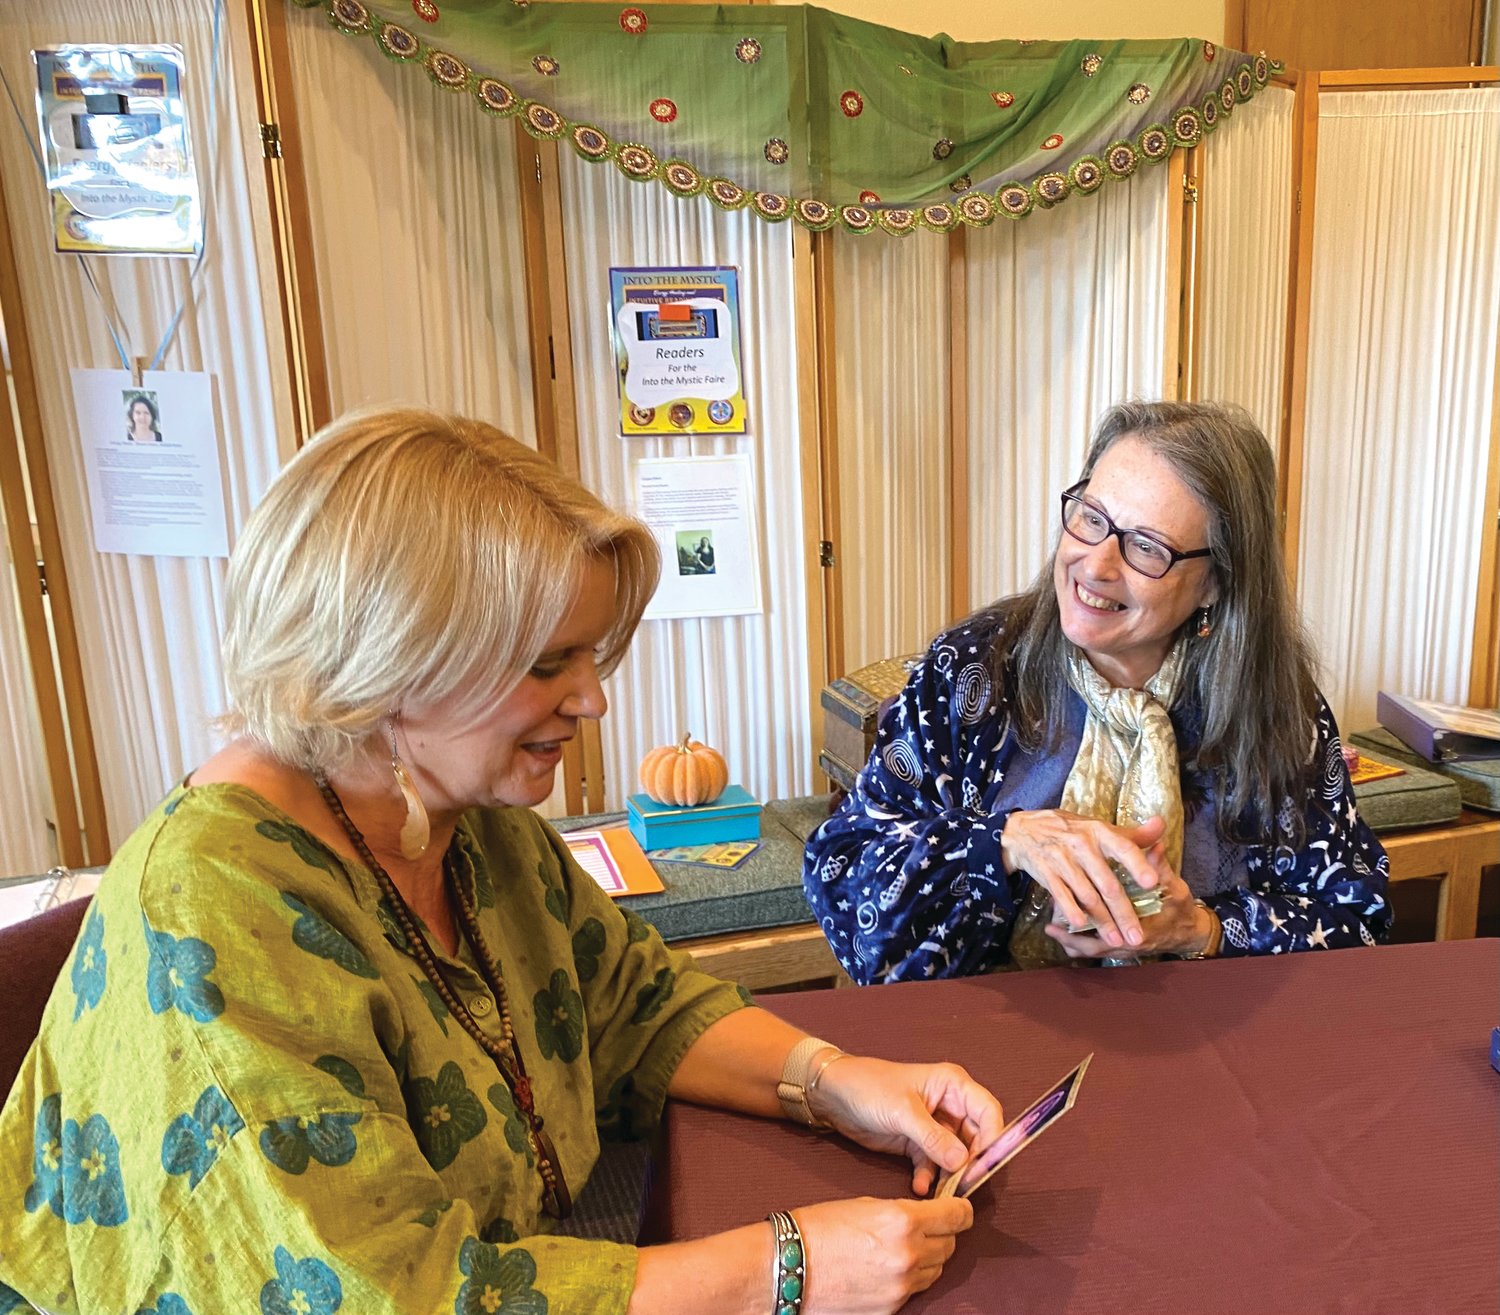 Denise Clair, right, is one of the readers who will be at the event using her skills with astrology, tarot, and channeling.